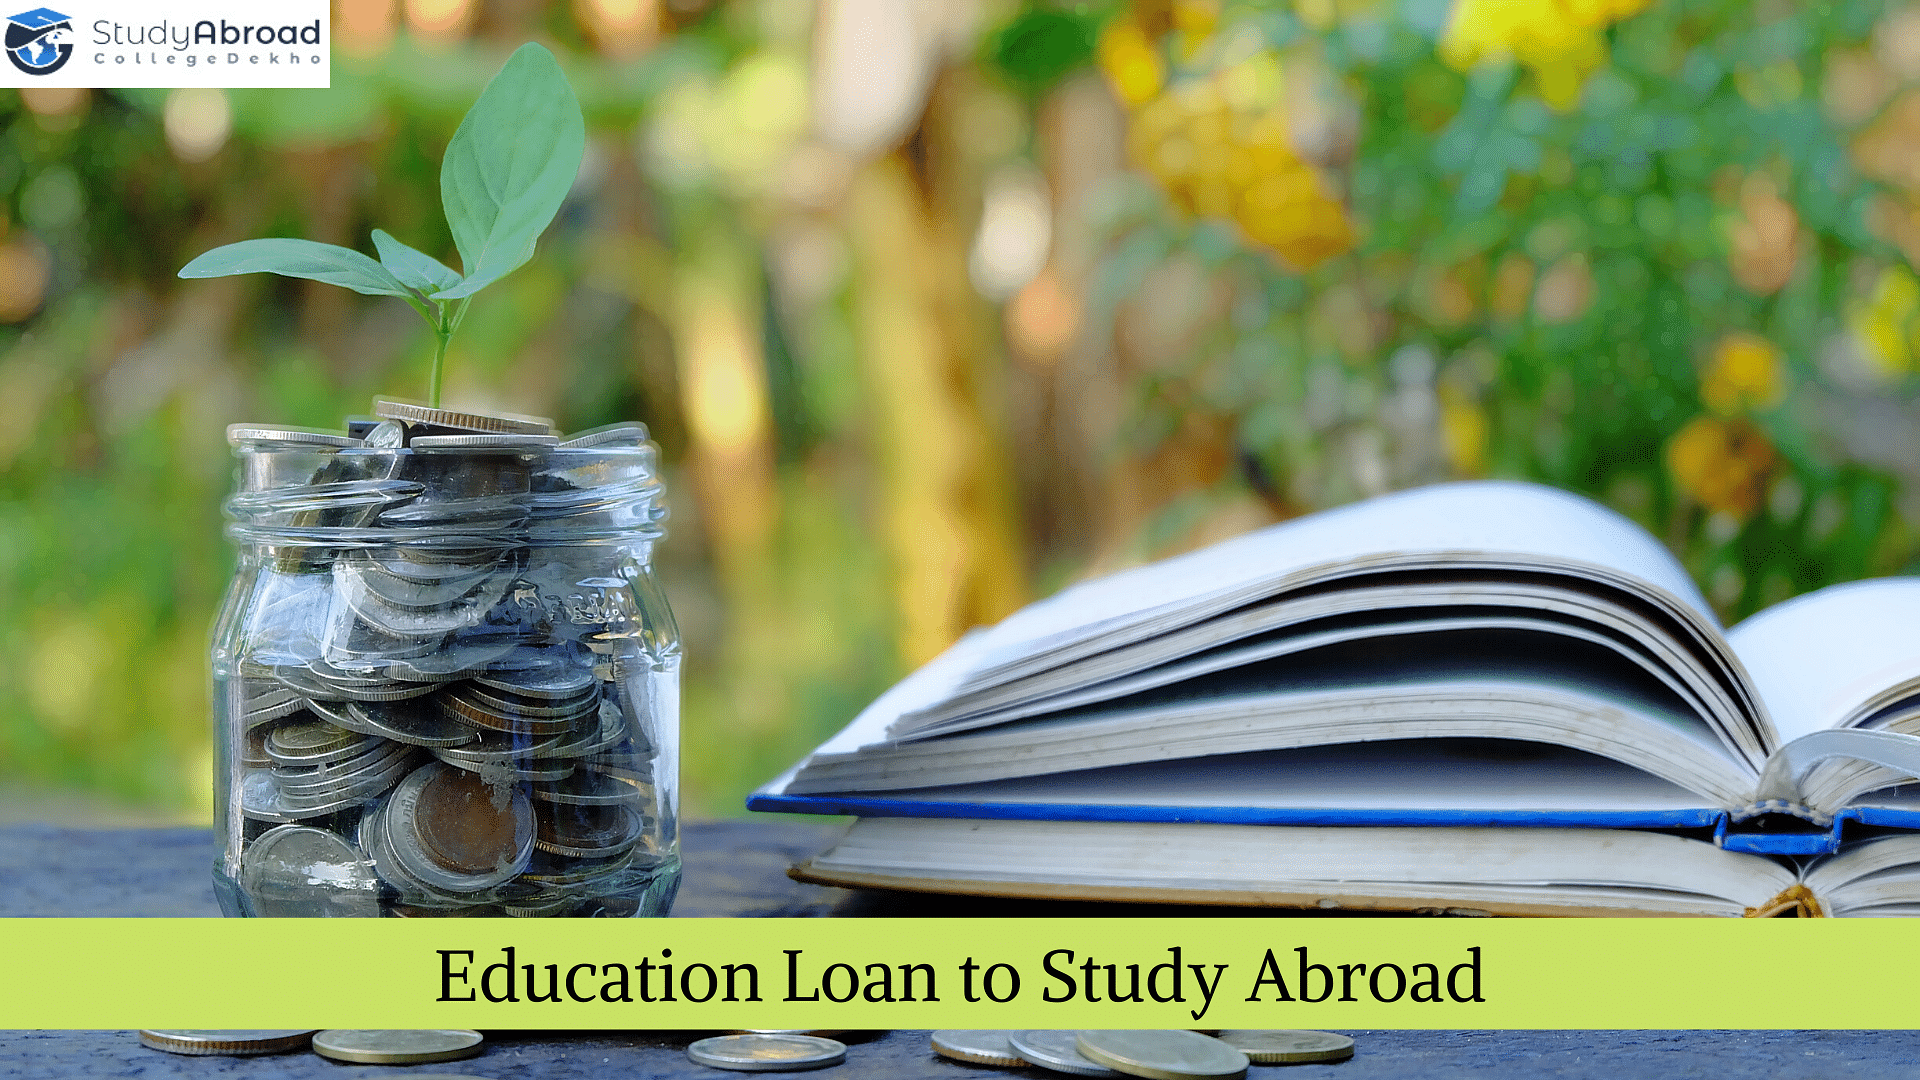 Make Your Education Loan Process Easy